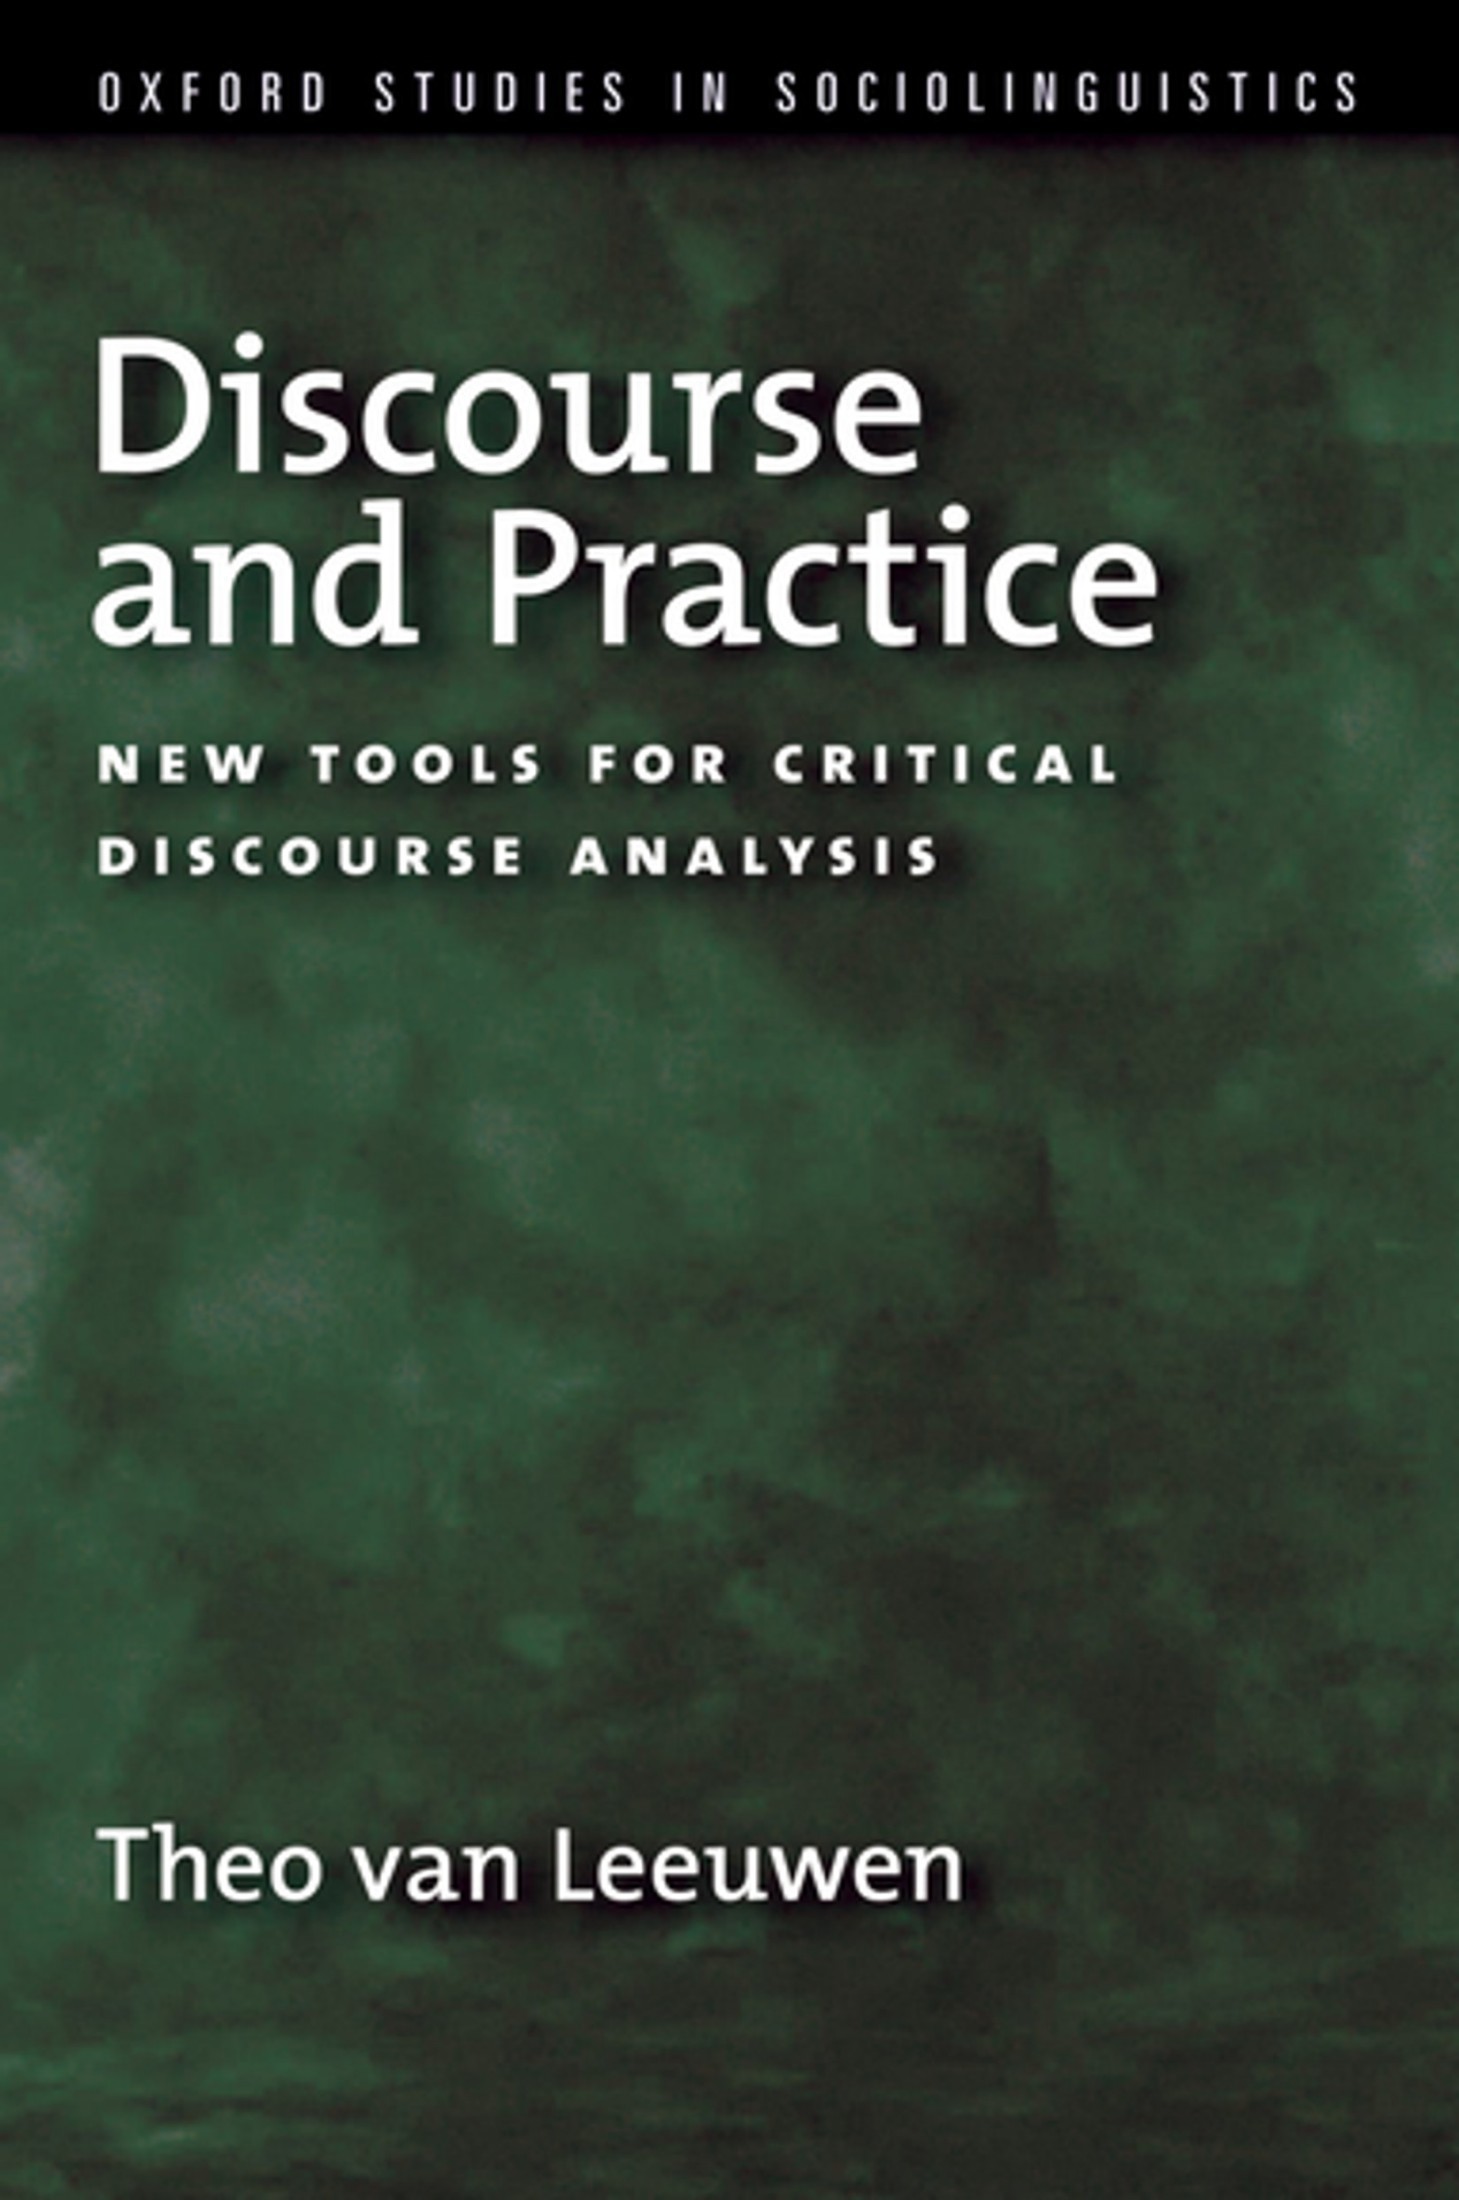 Discourse and Practice: New Tools for Critical Discourse Analysis